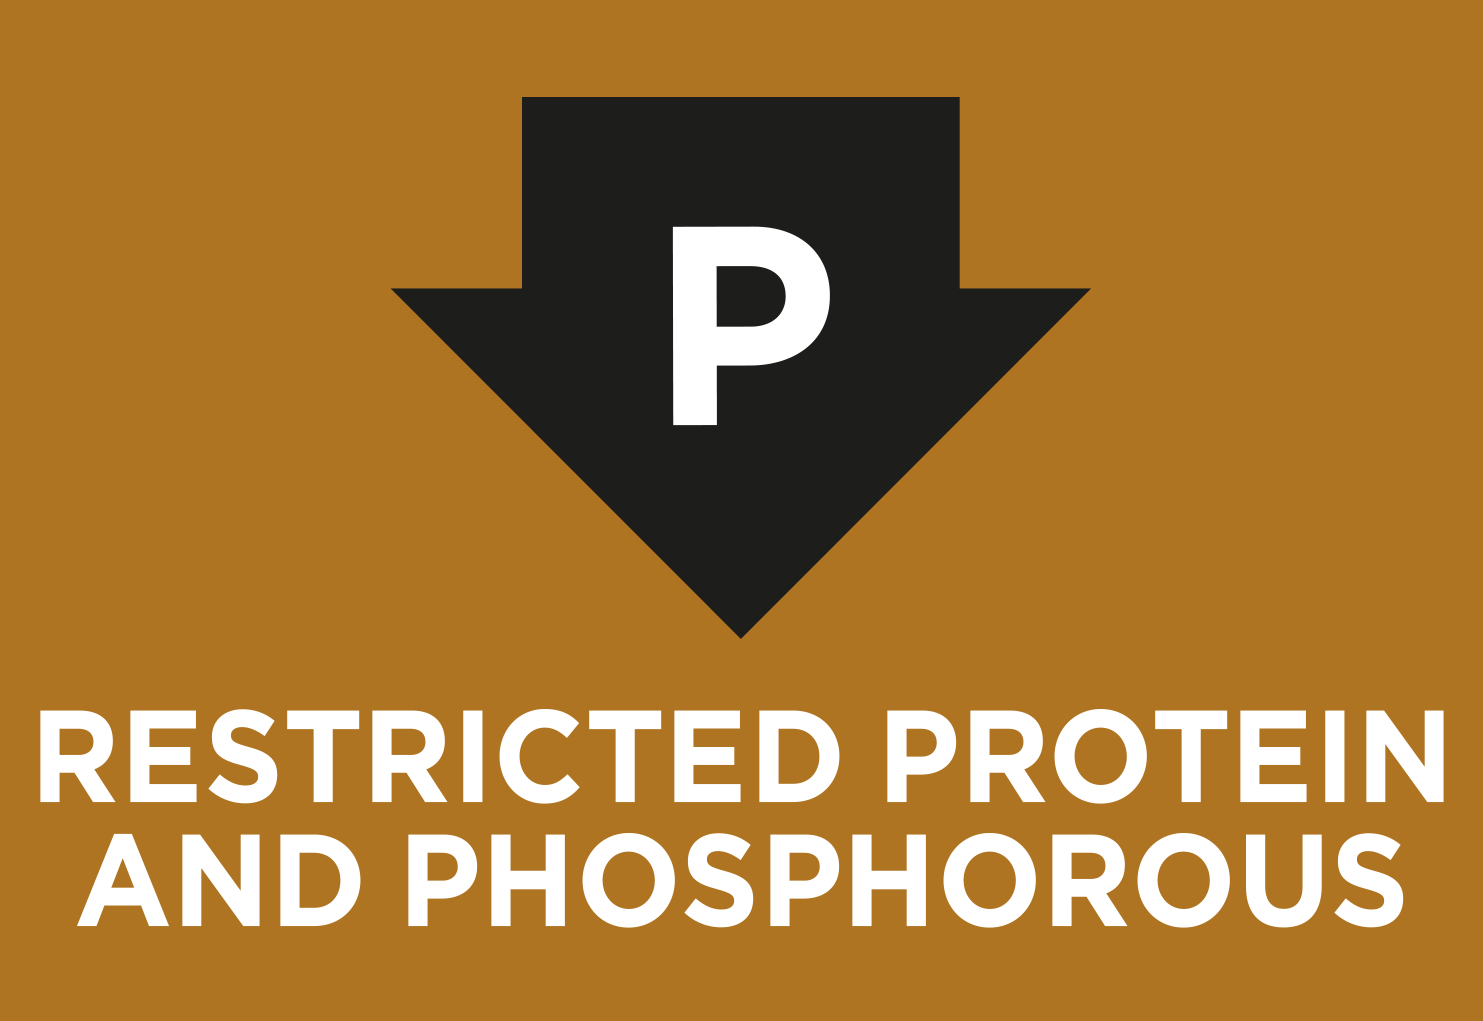 Restricted Protein and Phosphorous